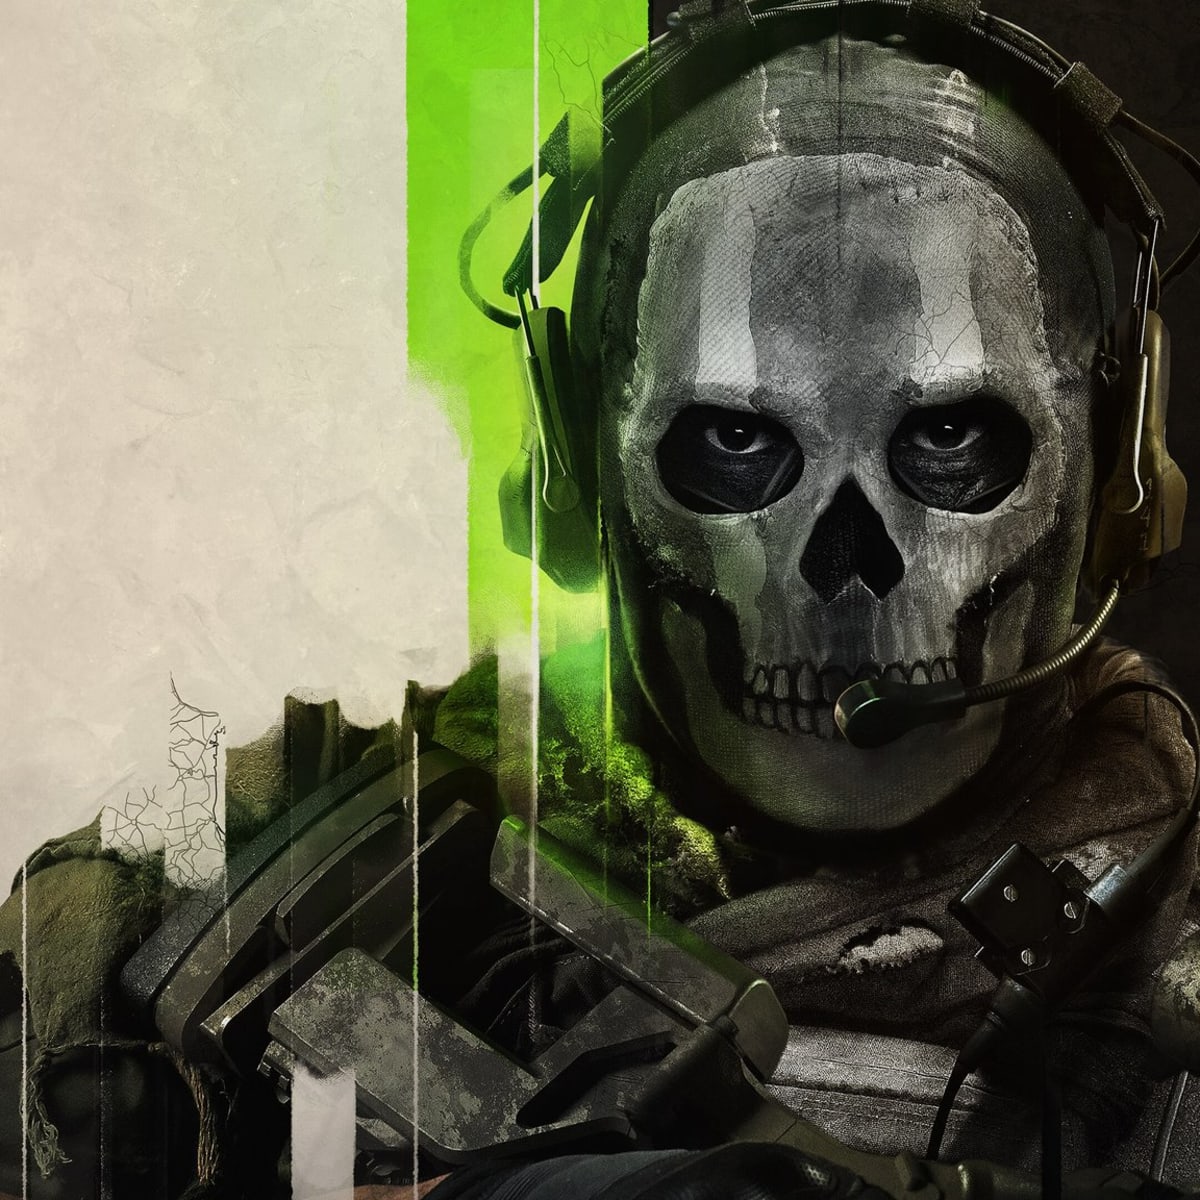 GHOST TAKES HIS MASK OFF IN COD MODERN WARFARE 2! 